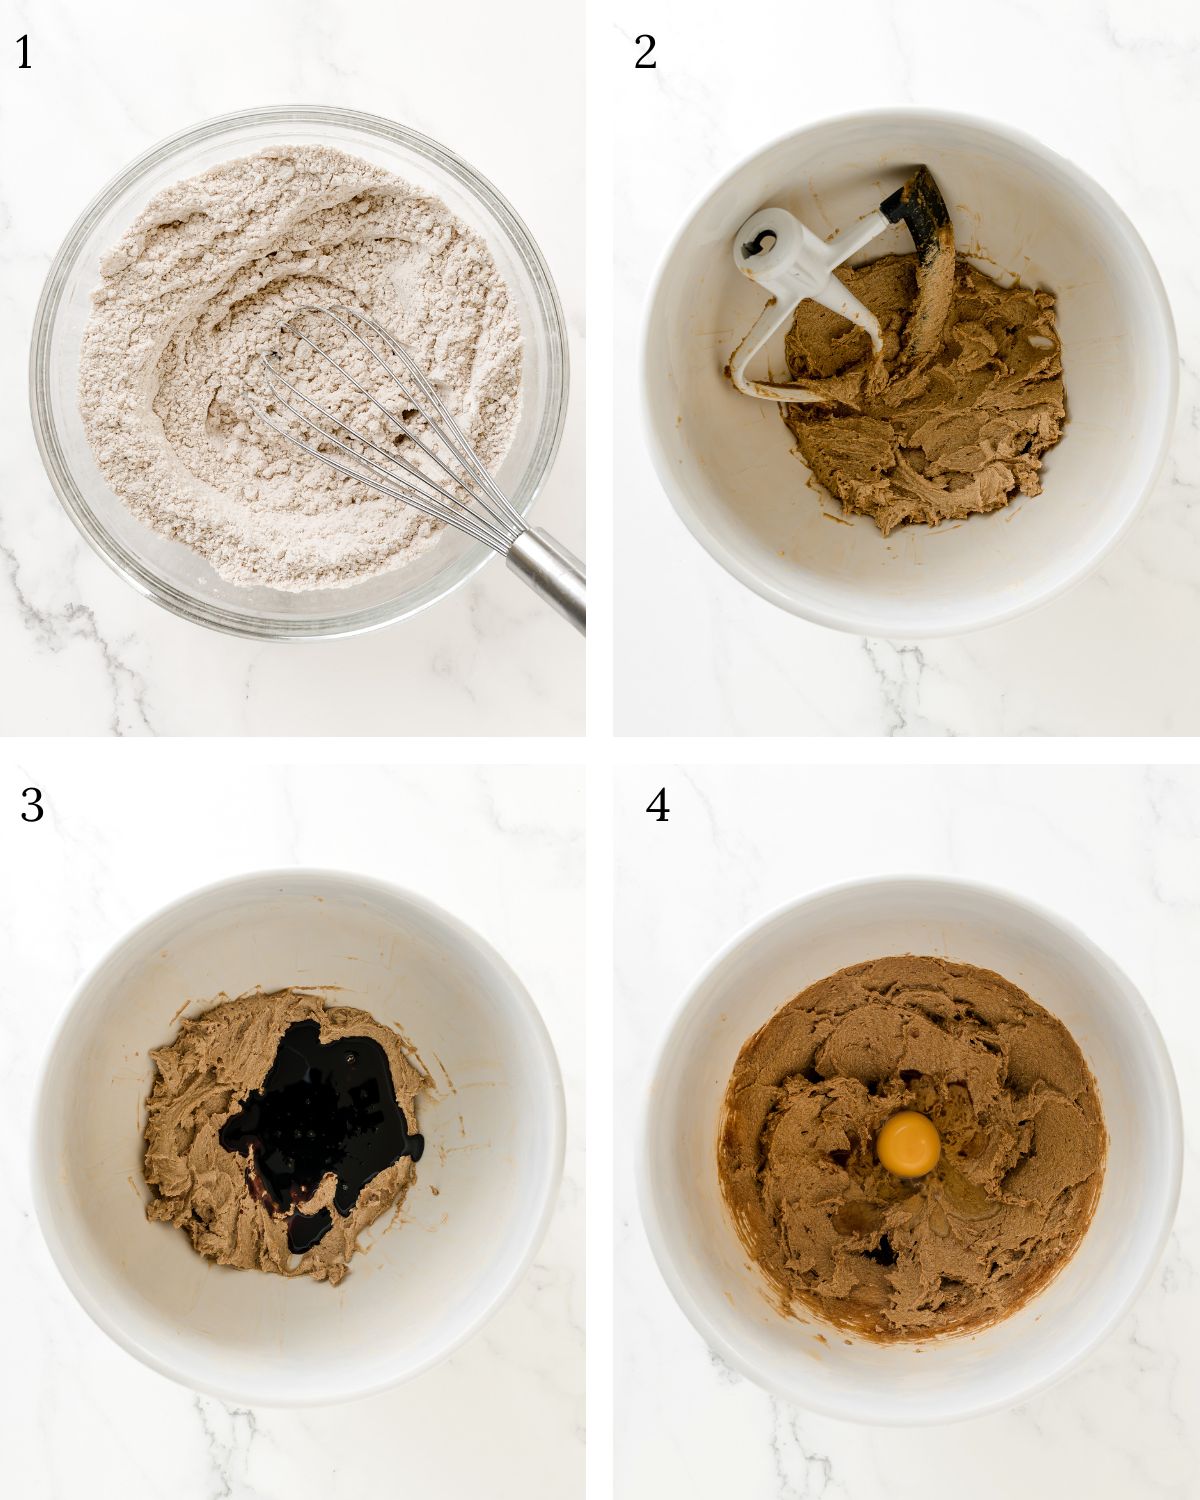 Instructions on how to make gluten-free molasses cookies. The first photo is a clear bowl whisking the dry ingredients, followed by a large white bowl creaming the butter and both sugars, adding the molasses, and then adding the egg and vanilla extract. 